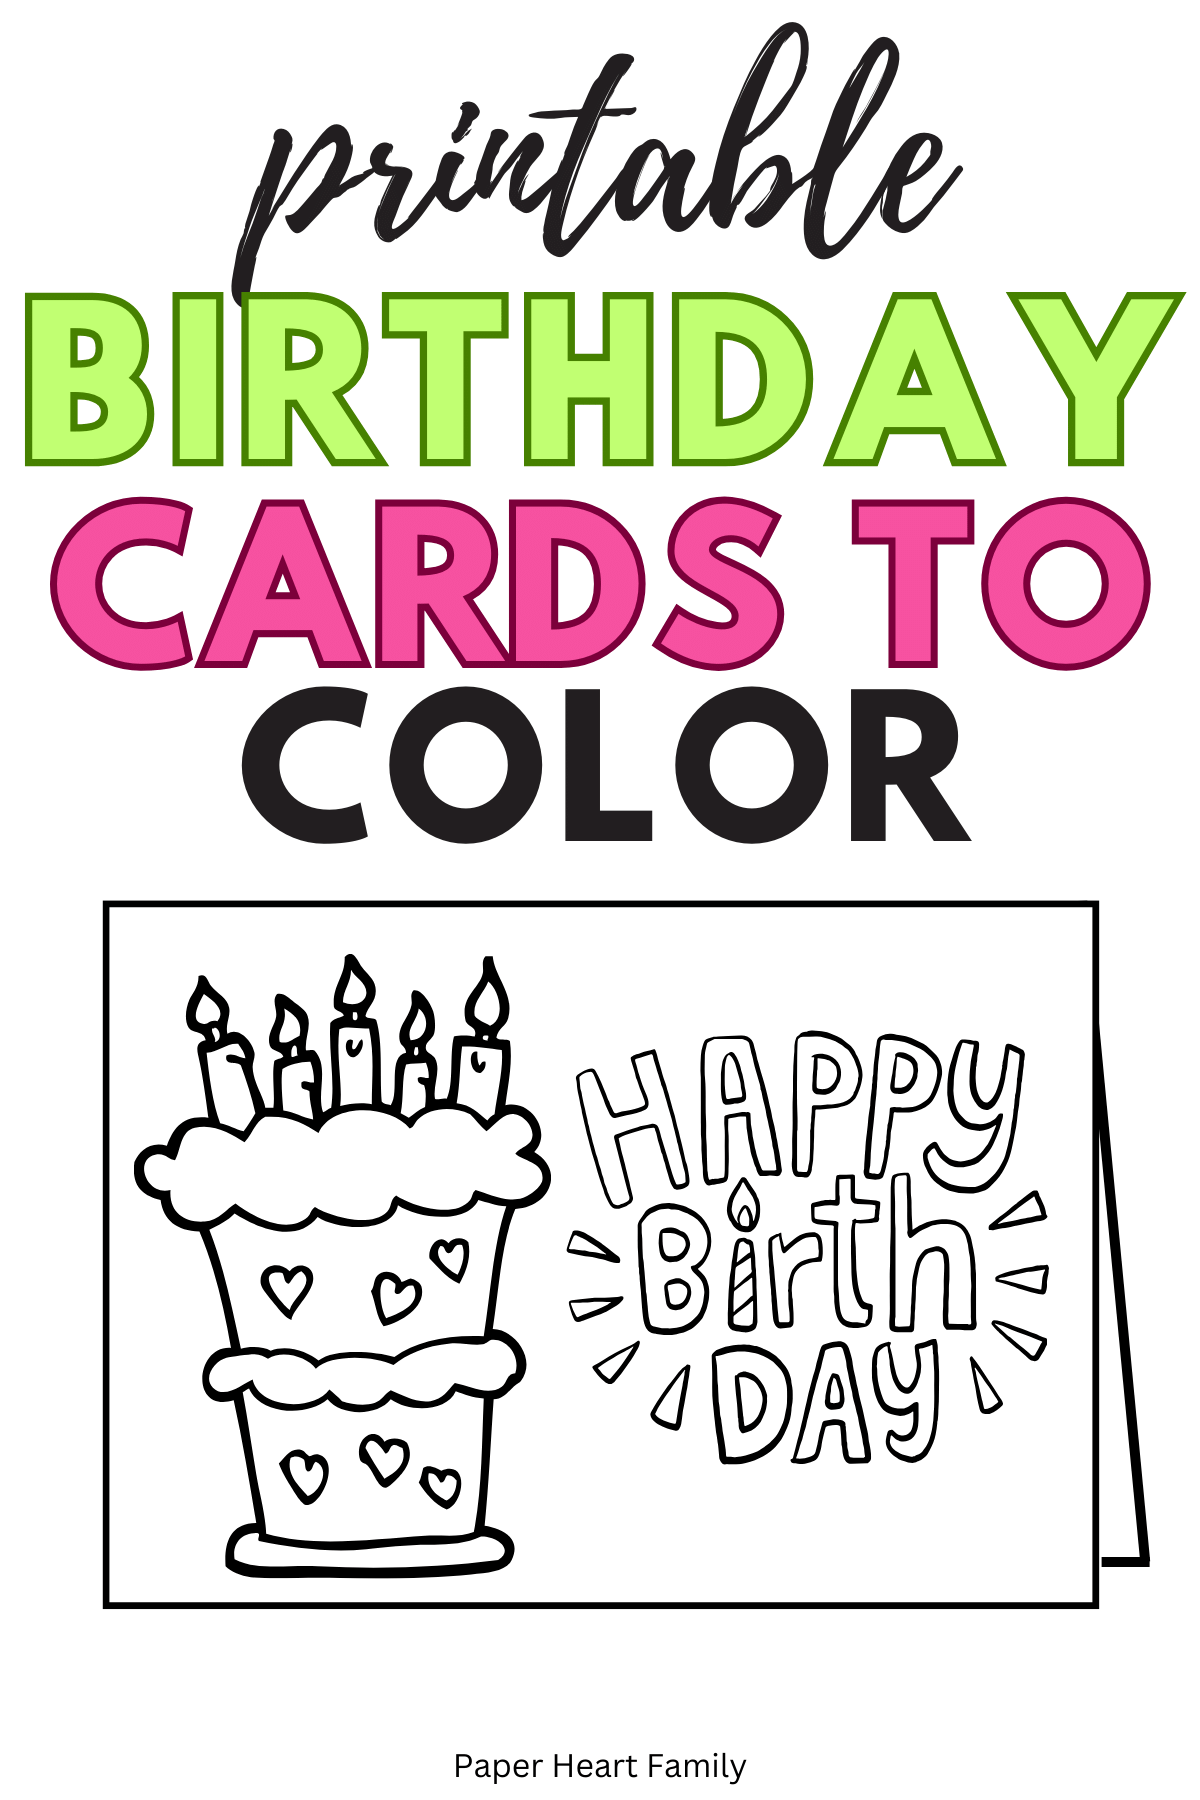 Card with a fun cake graphic and Happy Birthday message